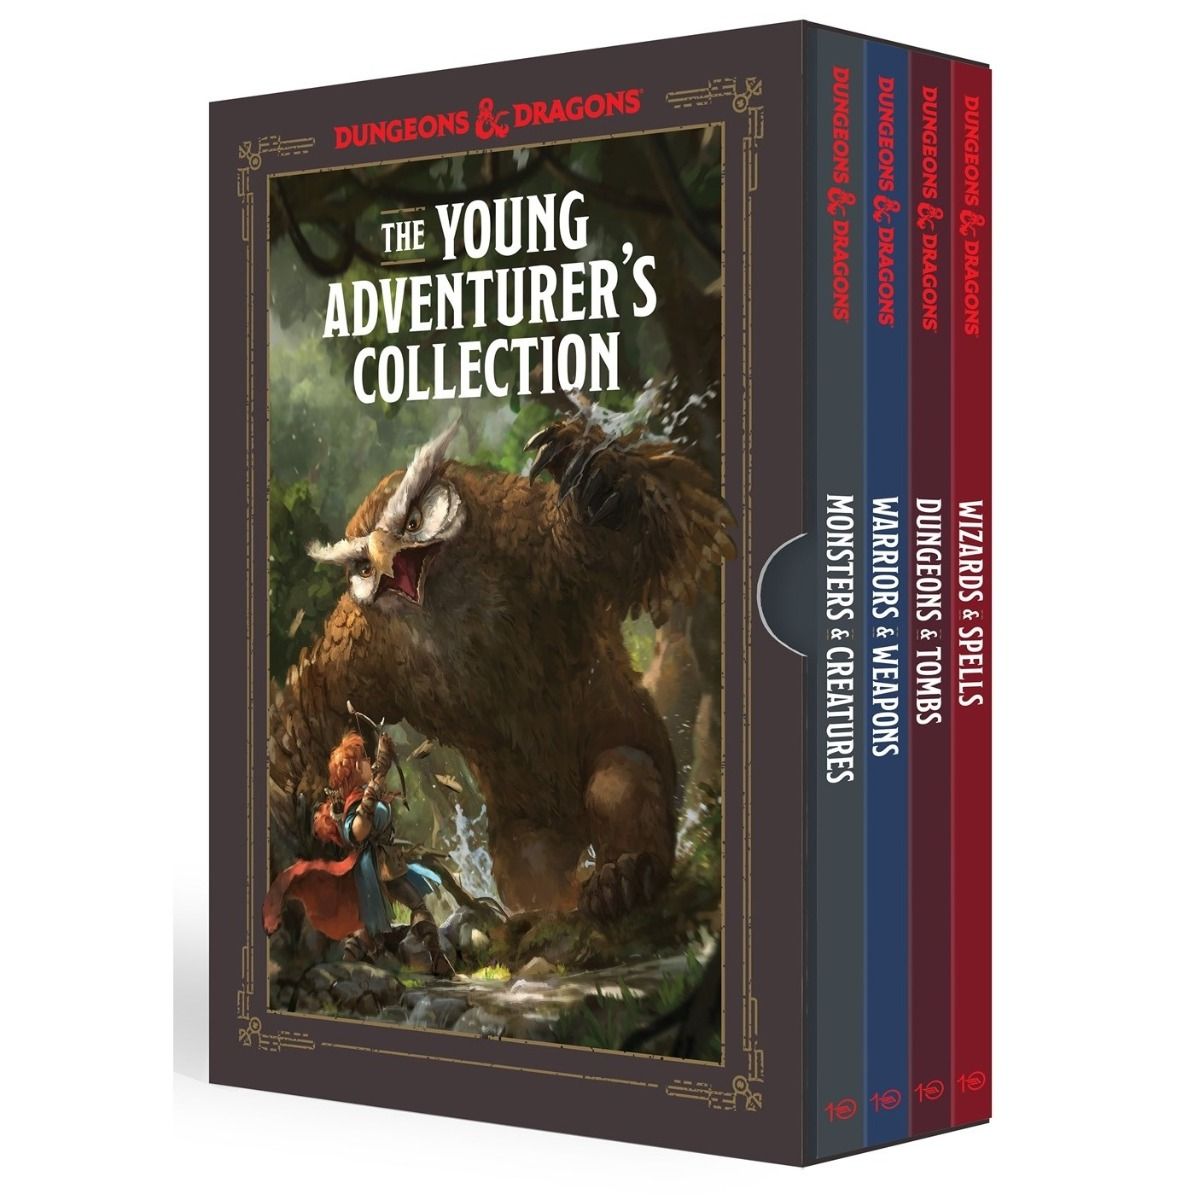 D&D: The Young Adventurer's Collection